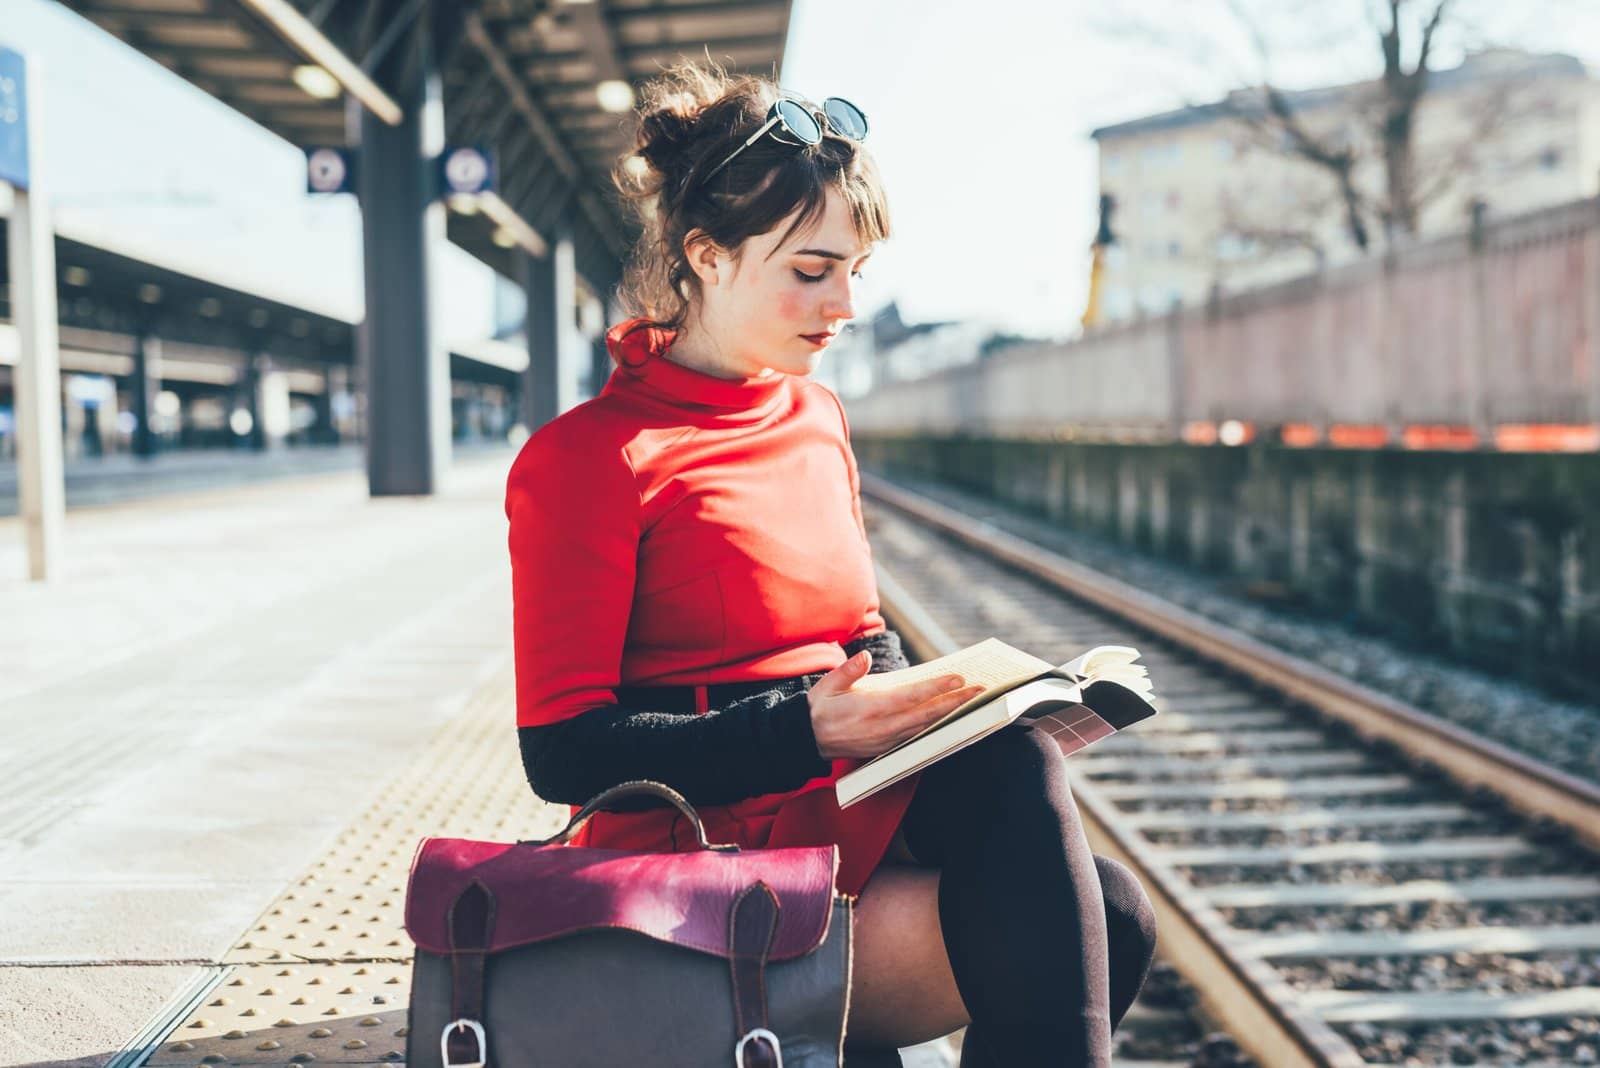 Photo of a young woman reading a book near train tracks